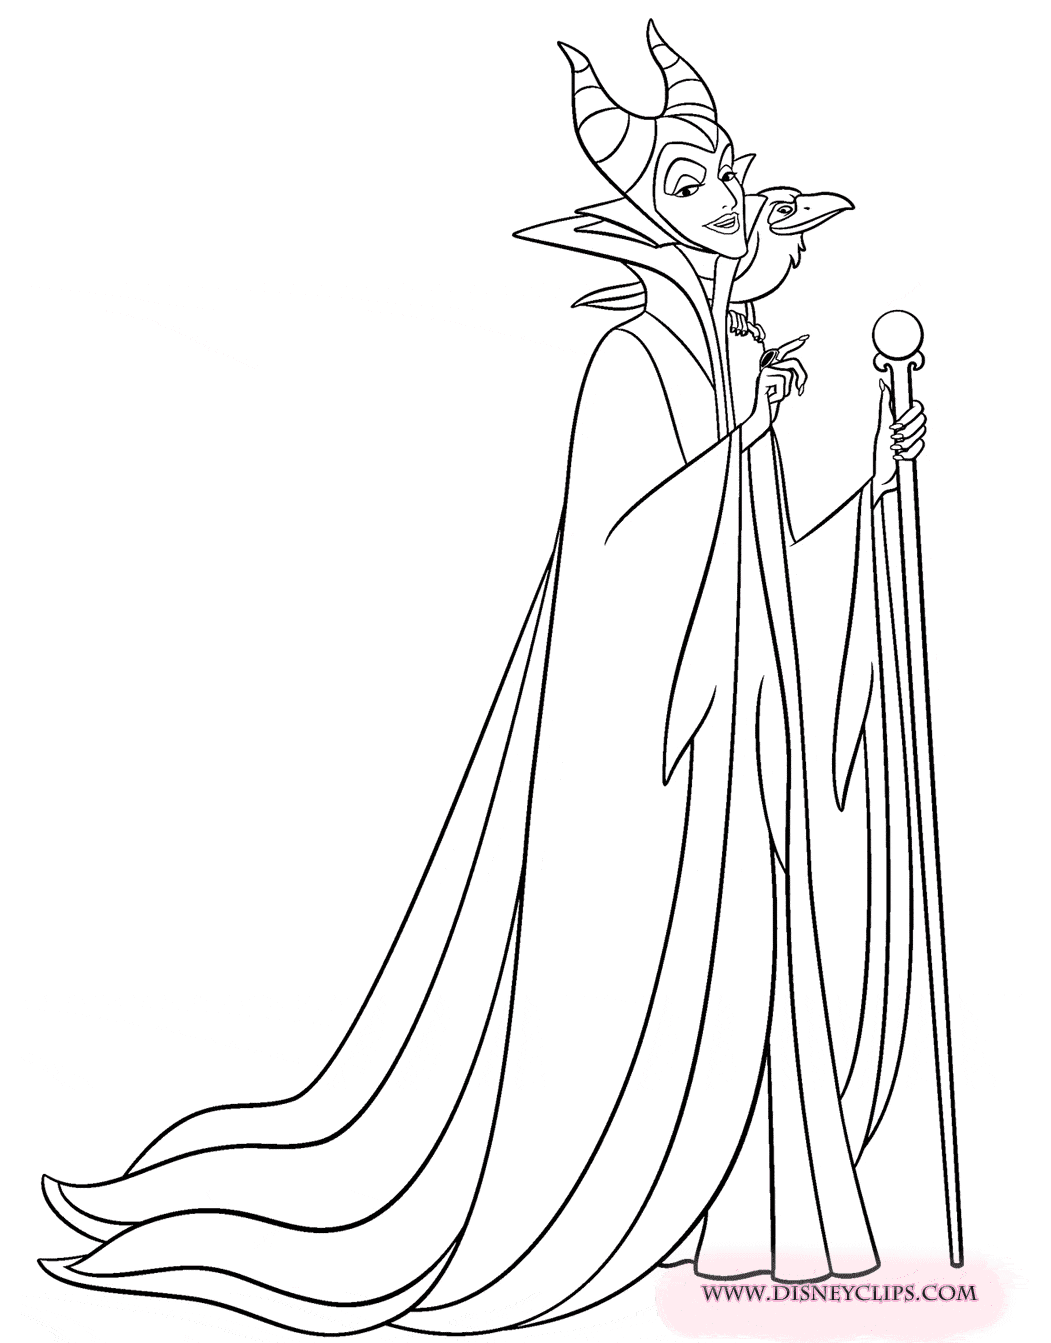 Maleficent and Diablo Coloring Pages